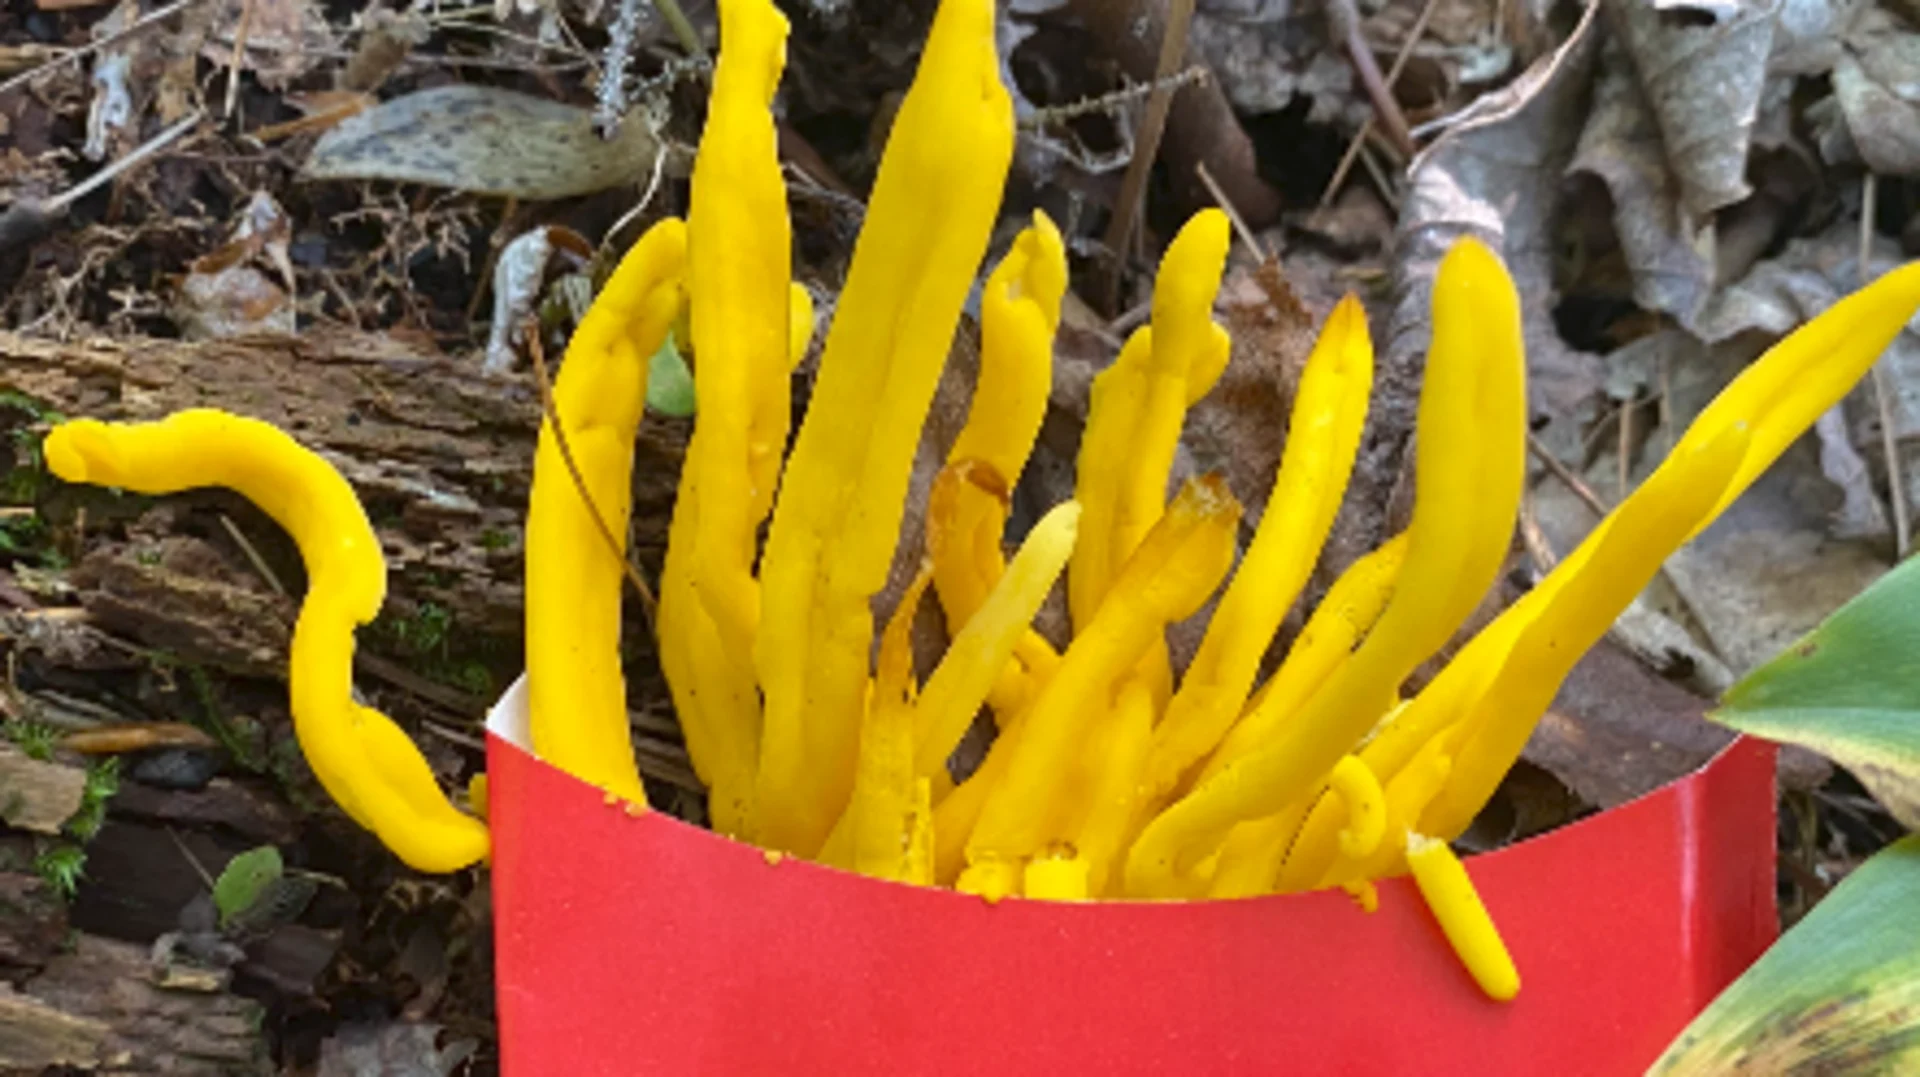 Wild french fries? Coral on land? No, they're mushrooms!